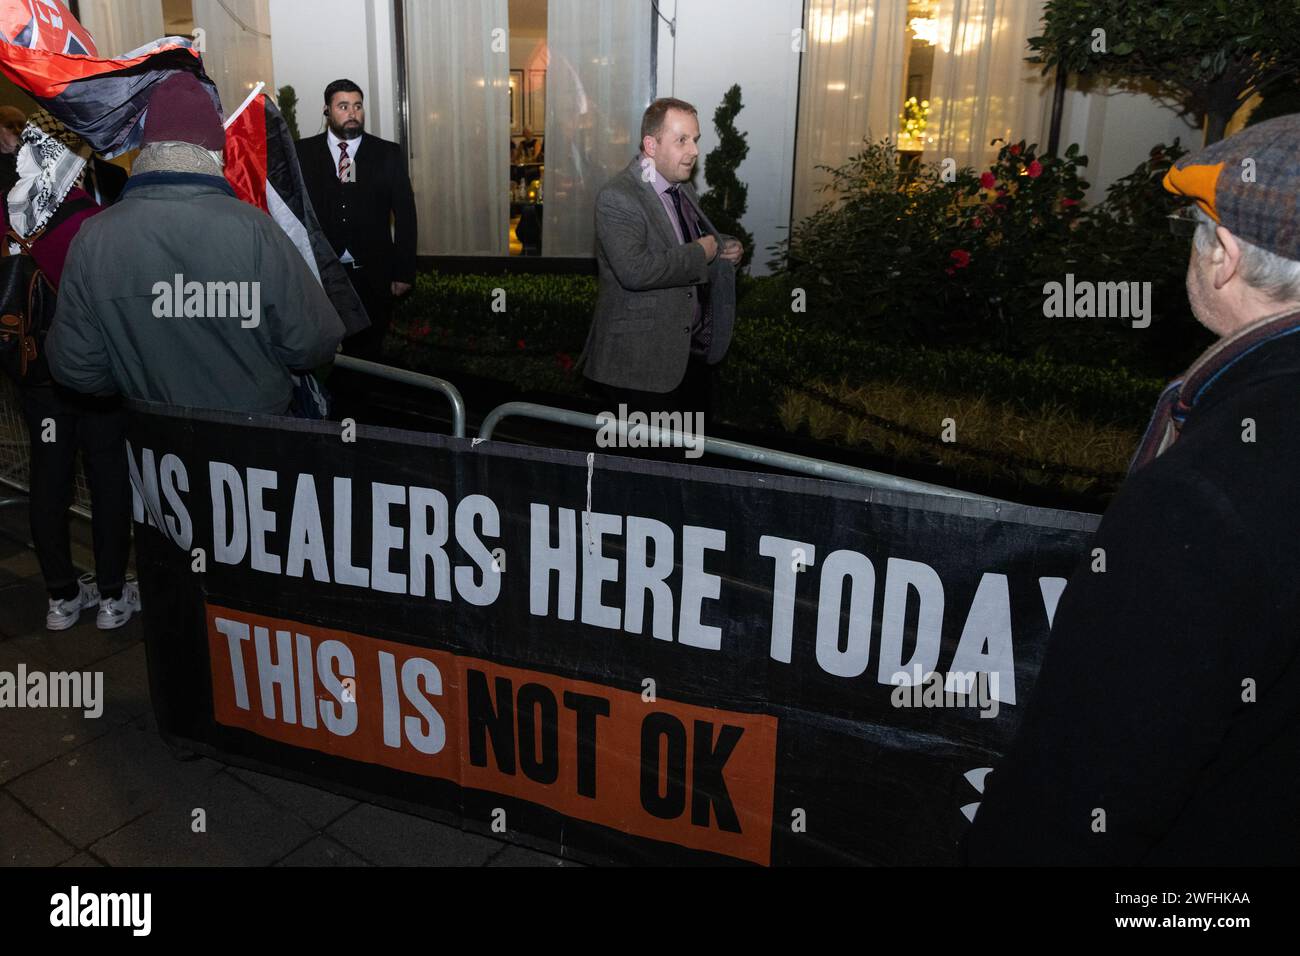 London, UK. 30th January, 2024. Guests arriving at the JW Marriott Grosvenor House Hotel for the ADS Annual Dinner encounter a protest by campaigners against the arms trade. The ADS Annual Dinner brings together representatives of companies from the UK's aerospace, defence, security and space industries. Sponsors of the event include BAE Systems which supplies components for F-35 combat aircraft used by Israel during its invasion of Gaza. Credit: Mark Kerrison/Alamy Live News Stock Photo